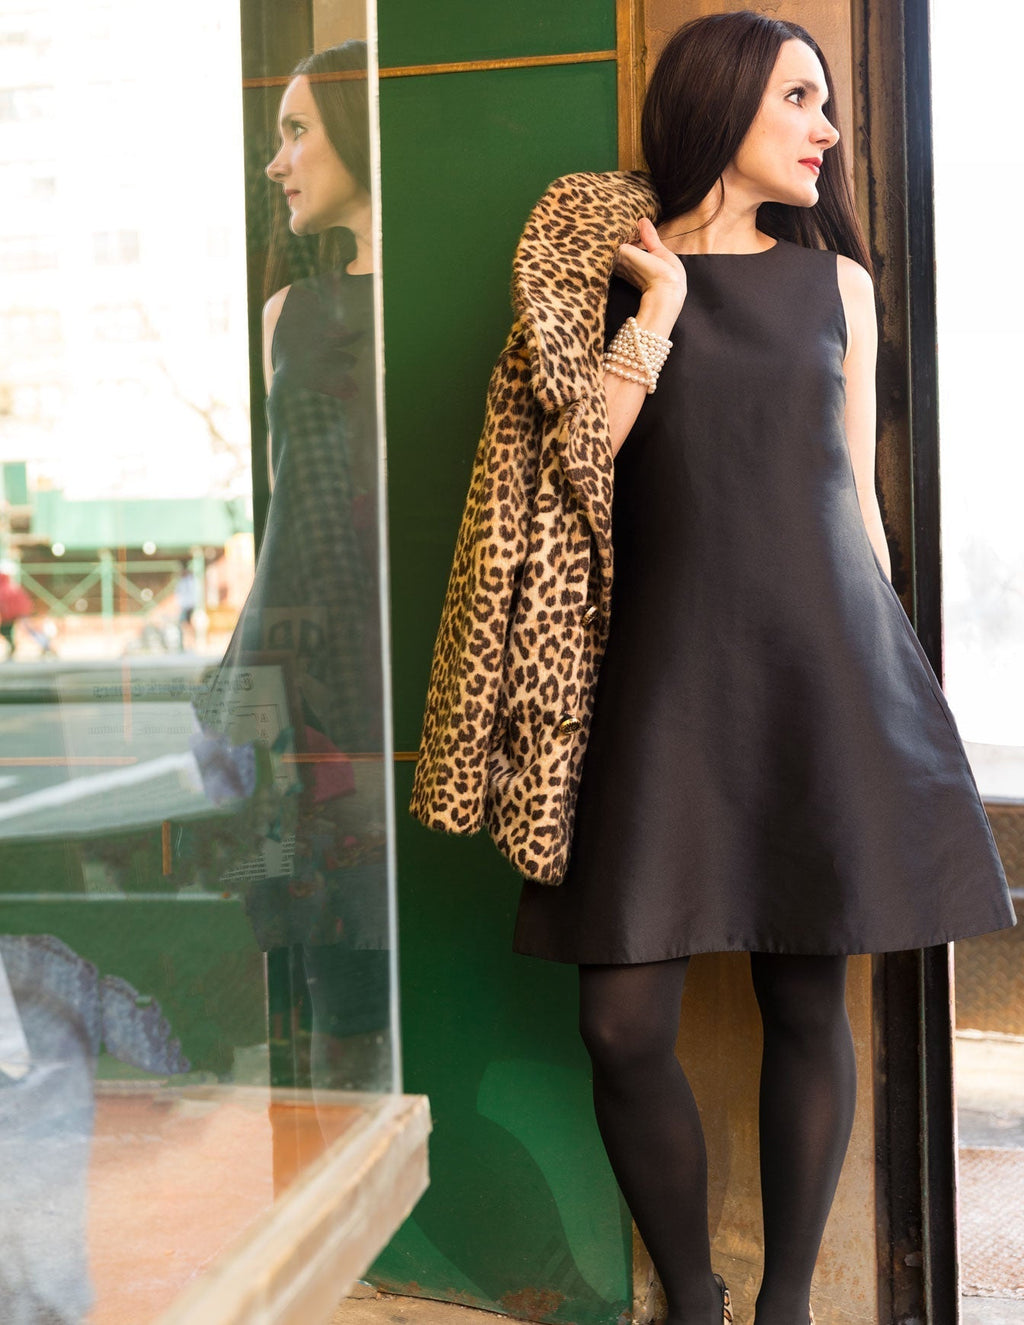 Classic A-line Style Dress with Pockets Black — The Lawson - Senza Tempo Fashion